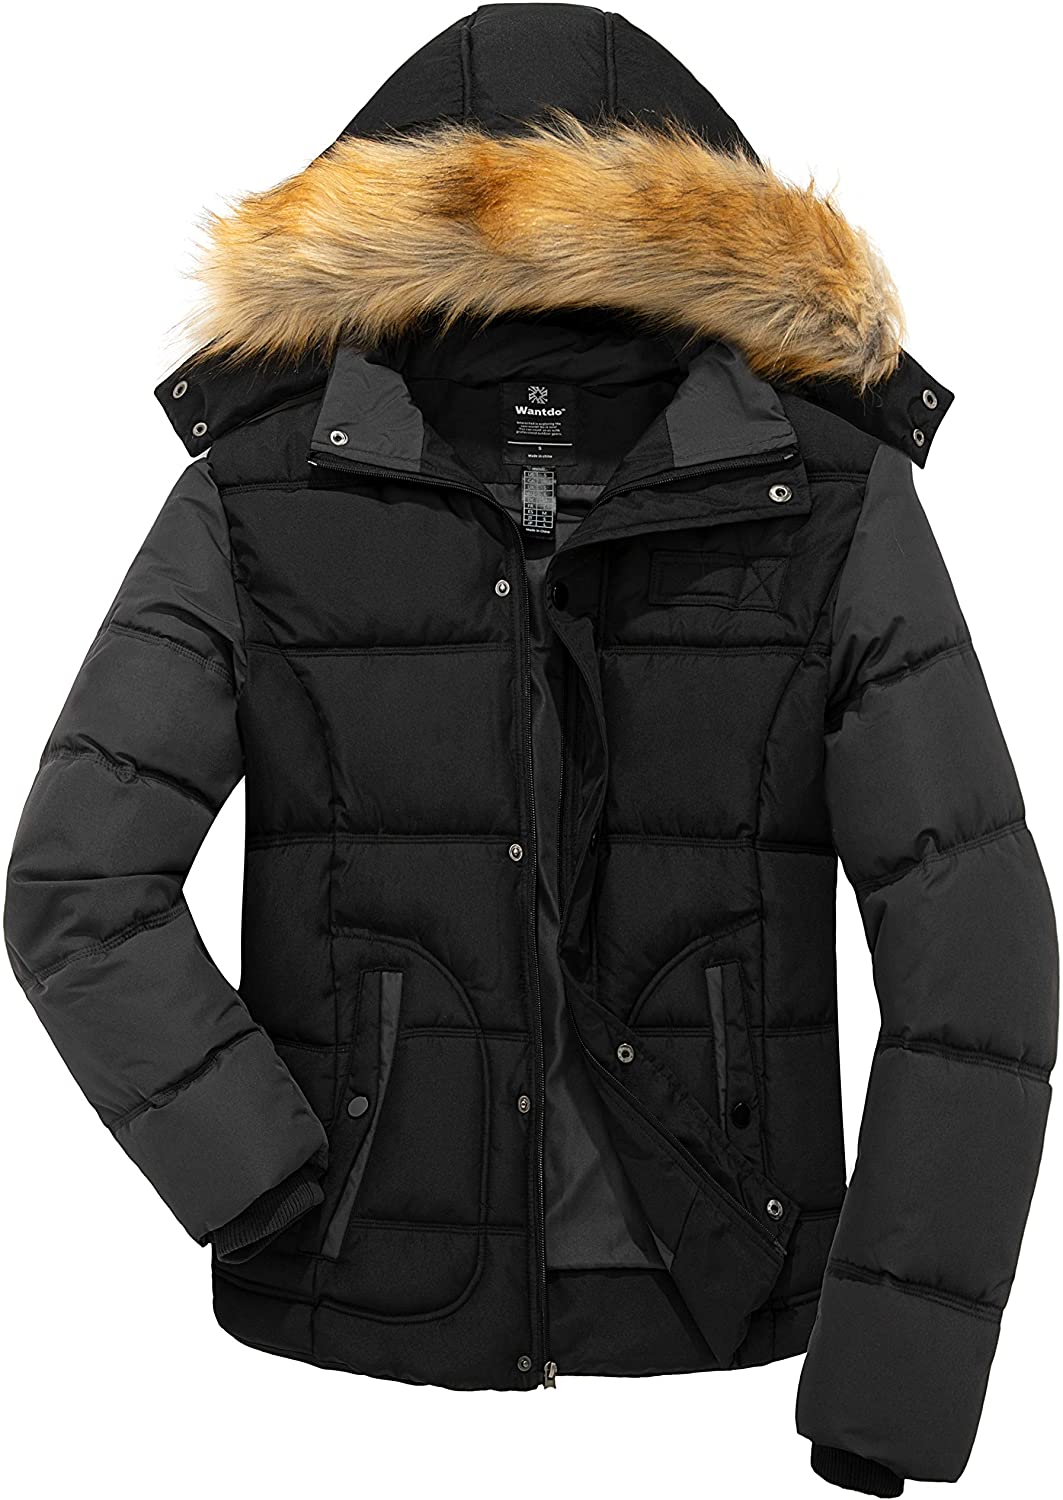 Wantdo Men's Puffer Jacket Thicken Padded Winter Coat with Removable Hood